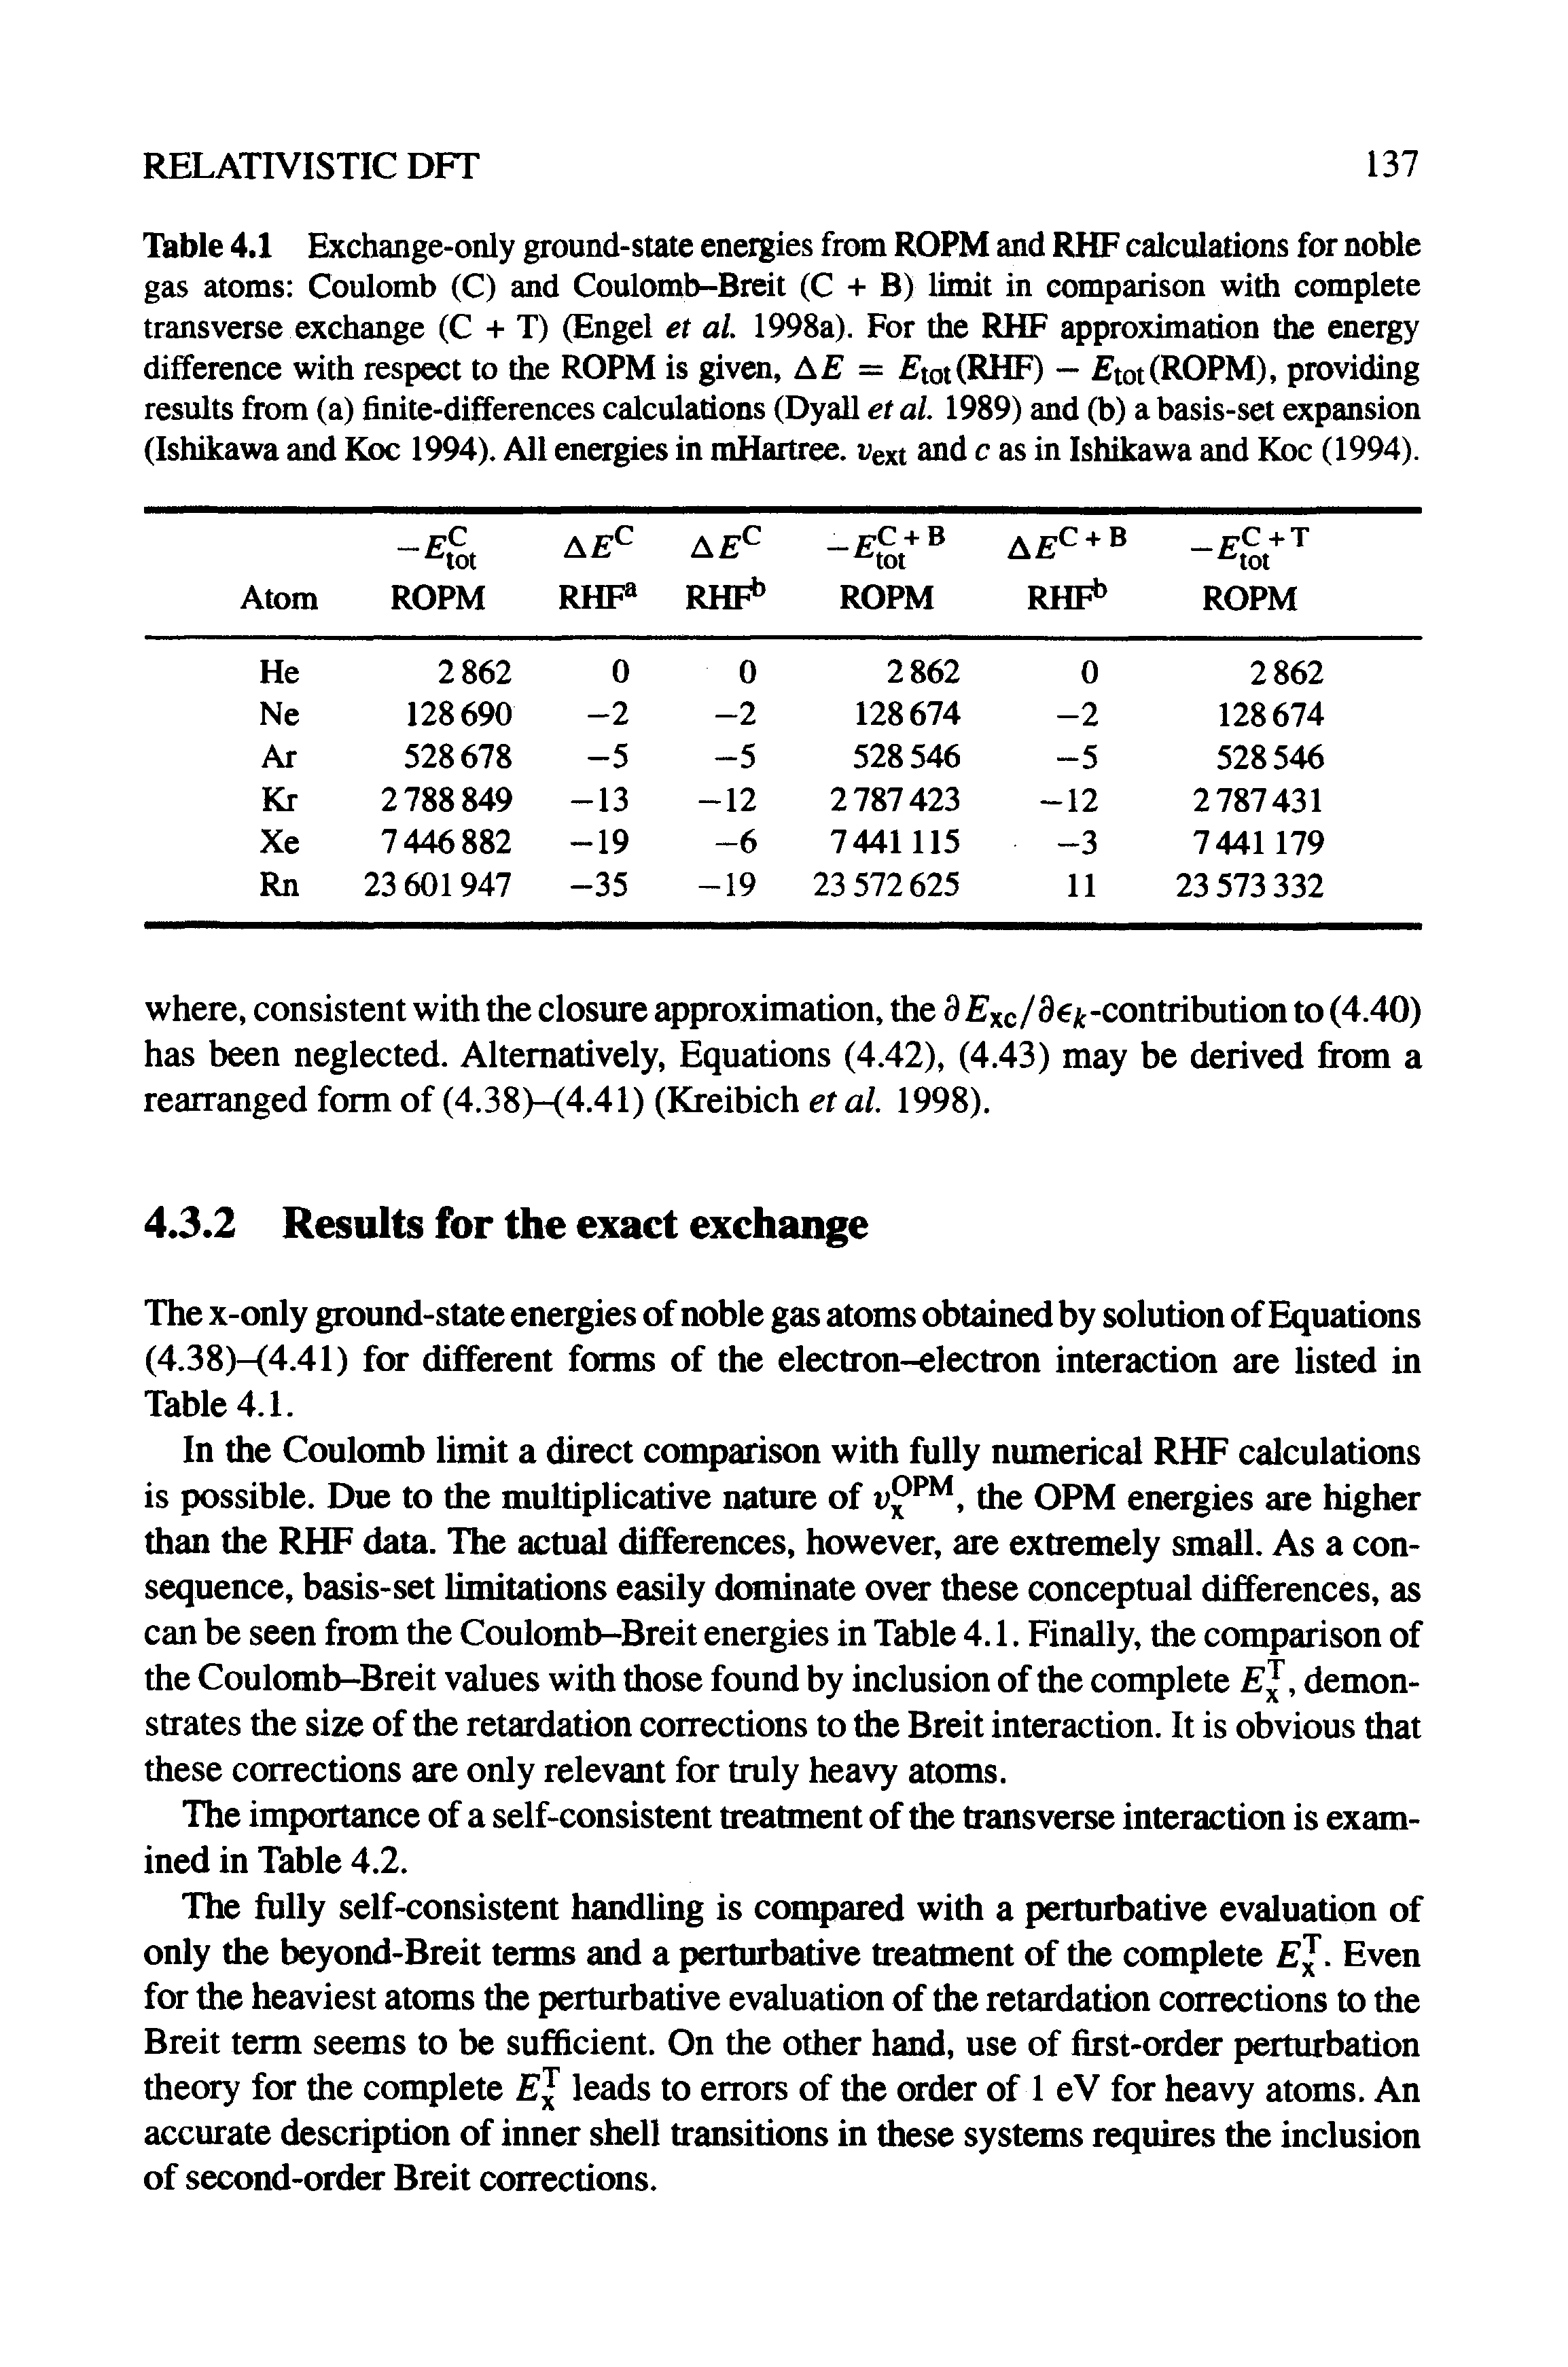 Table 4.1 Exchange-only ground-state energies from ROPM and RHF calculations for noble gas atoms Coulomb (C) and Coulomb-Breit (C + B) limit in comparison with complete transverse exchange (C + T) (Engel et al. 1998a). For the RHF approximation the energy difference with respect to the ROPM is given, AE = tot(RHF) — tot(ROPM), providing results from (a) finite-differences calculations (Dyall et al. 1989) and (b) a basis-set expansion (Ishikawa and Koc 1994). All energies in mHartree. uext and c as in Ishikawa and Koc (1994).